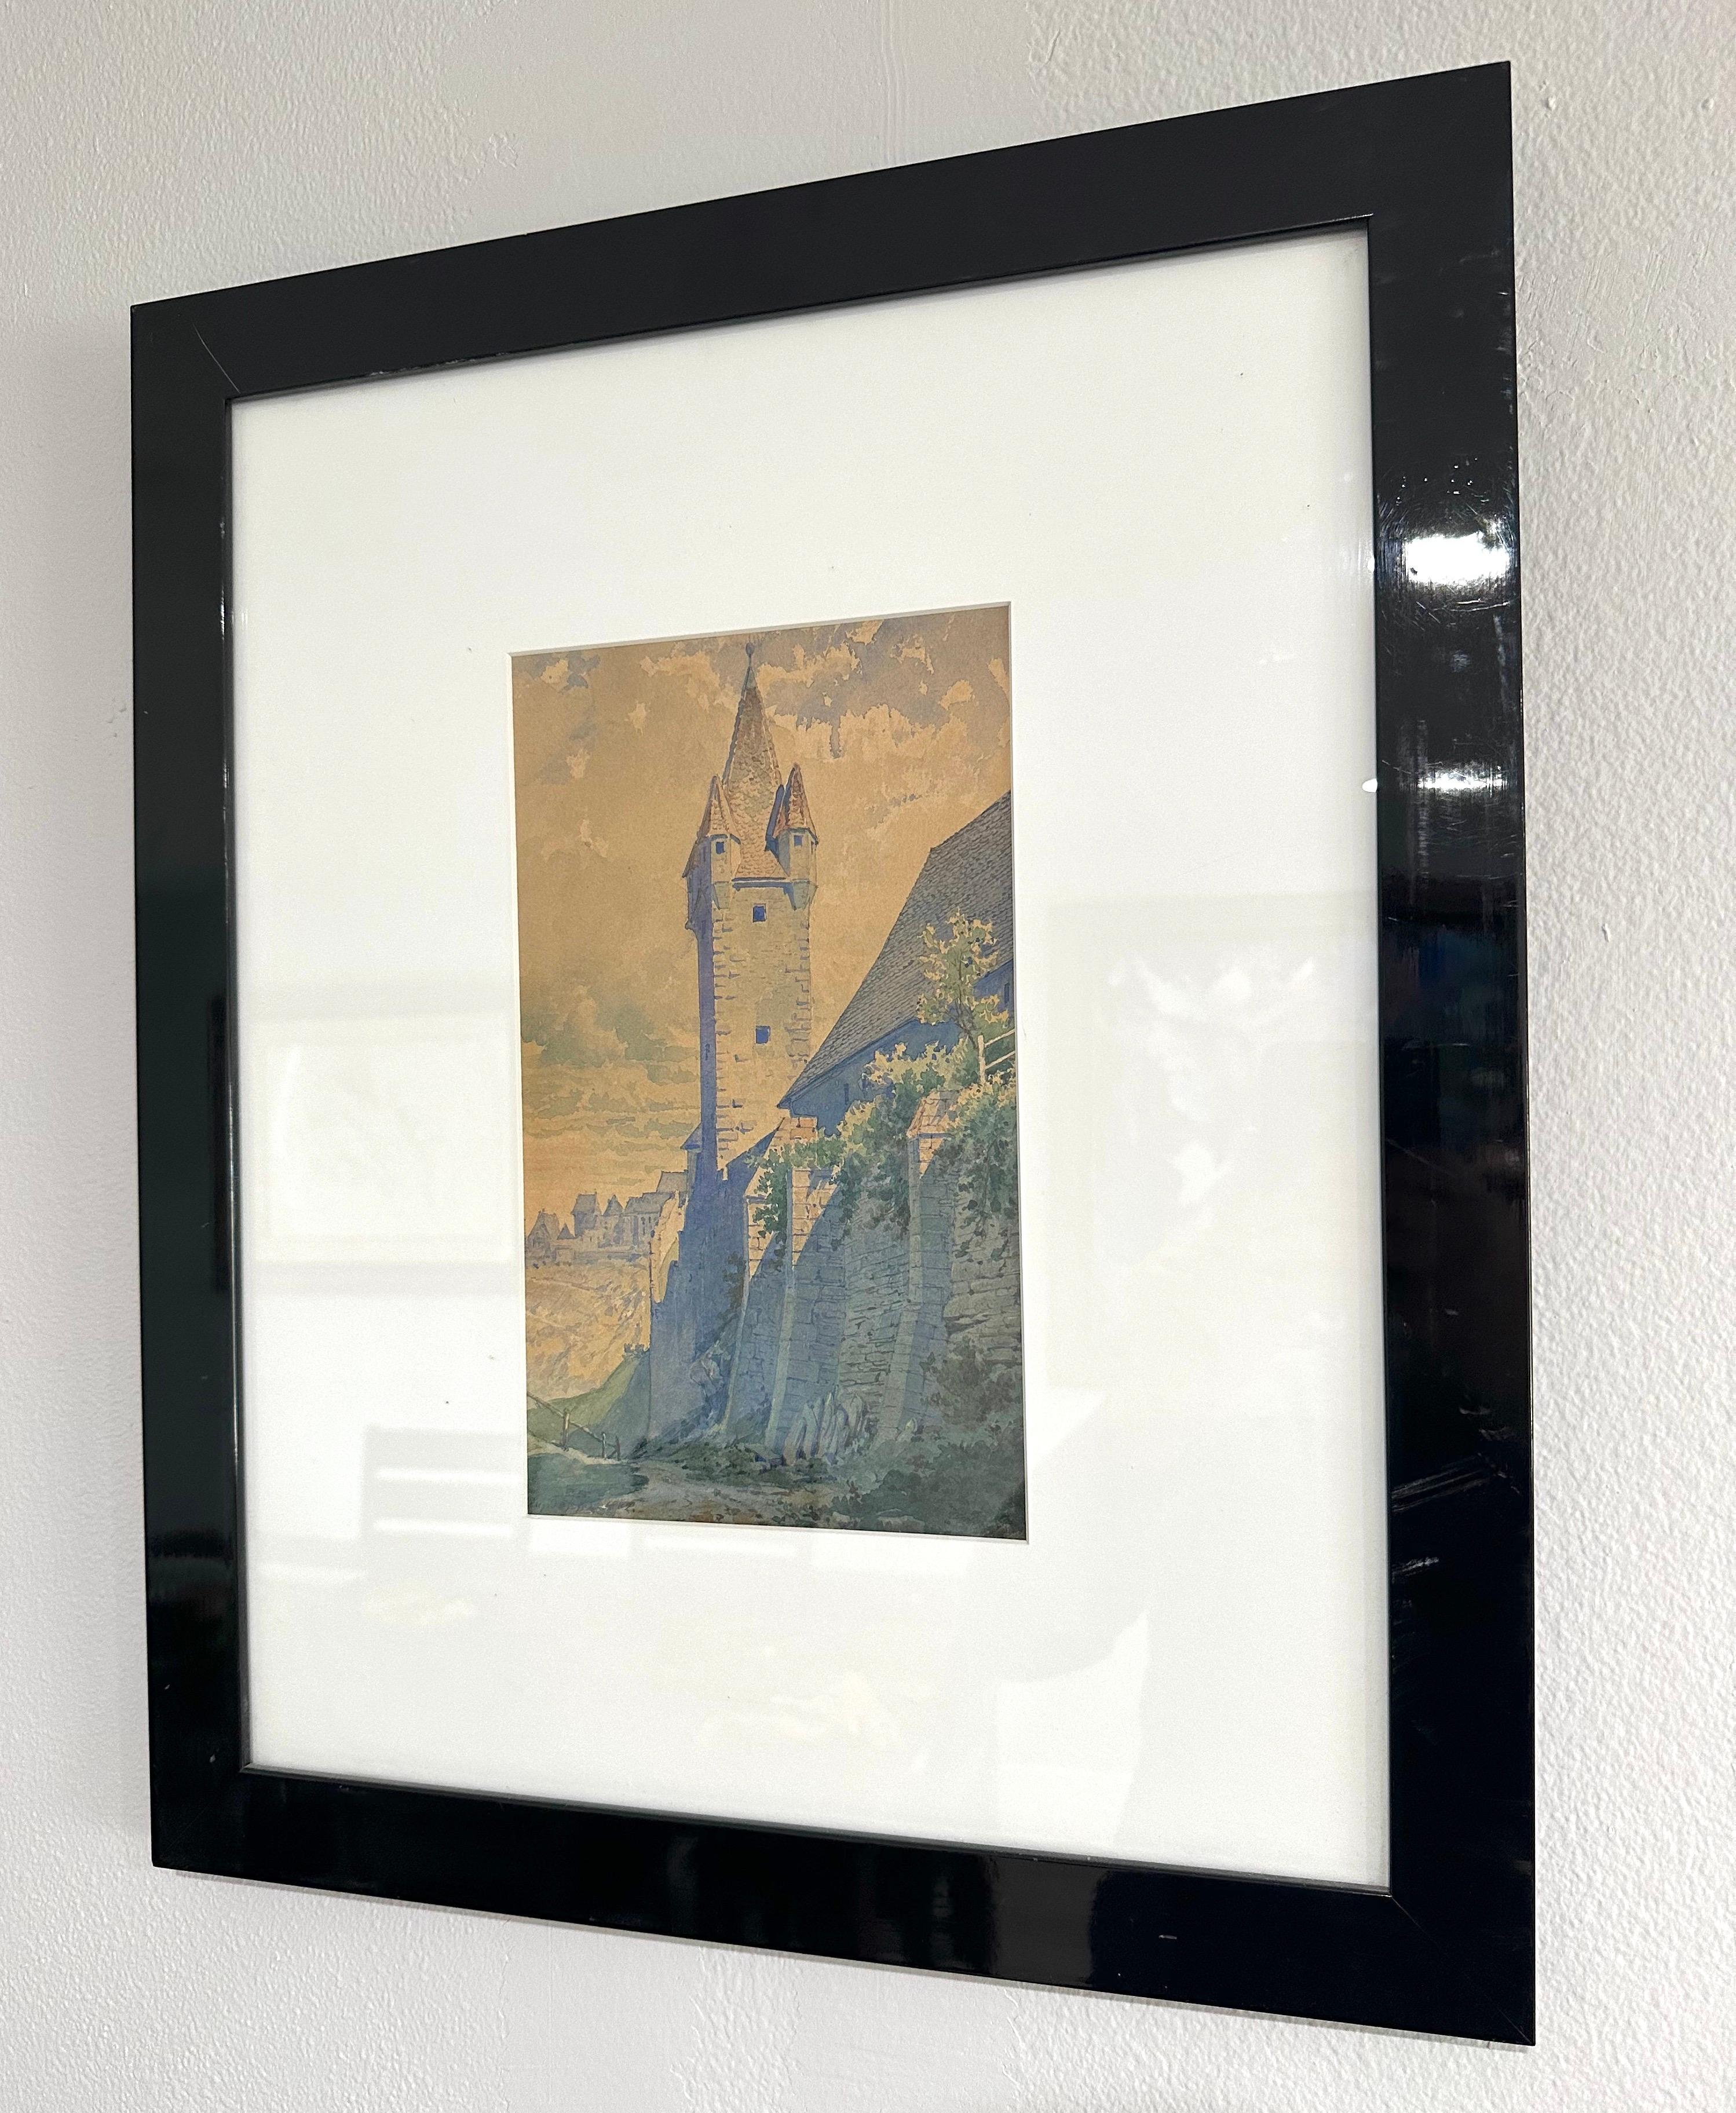 Tower, Original Watercolor Painting, Ready to Hang, Framed - Art by August Töpfer